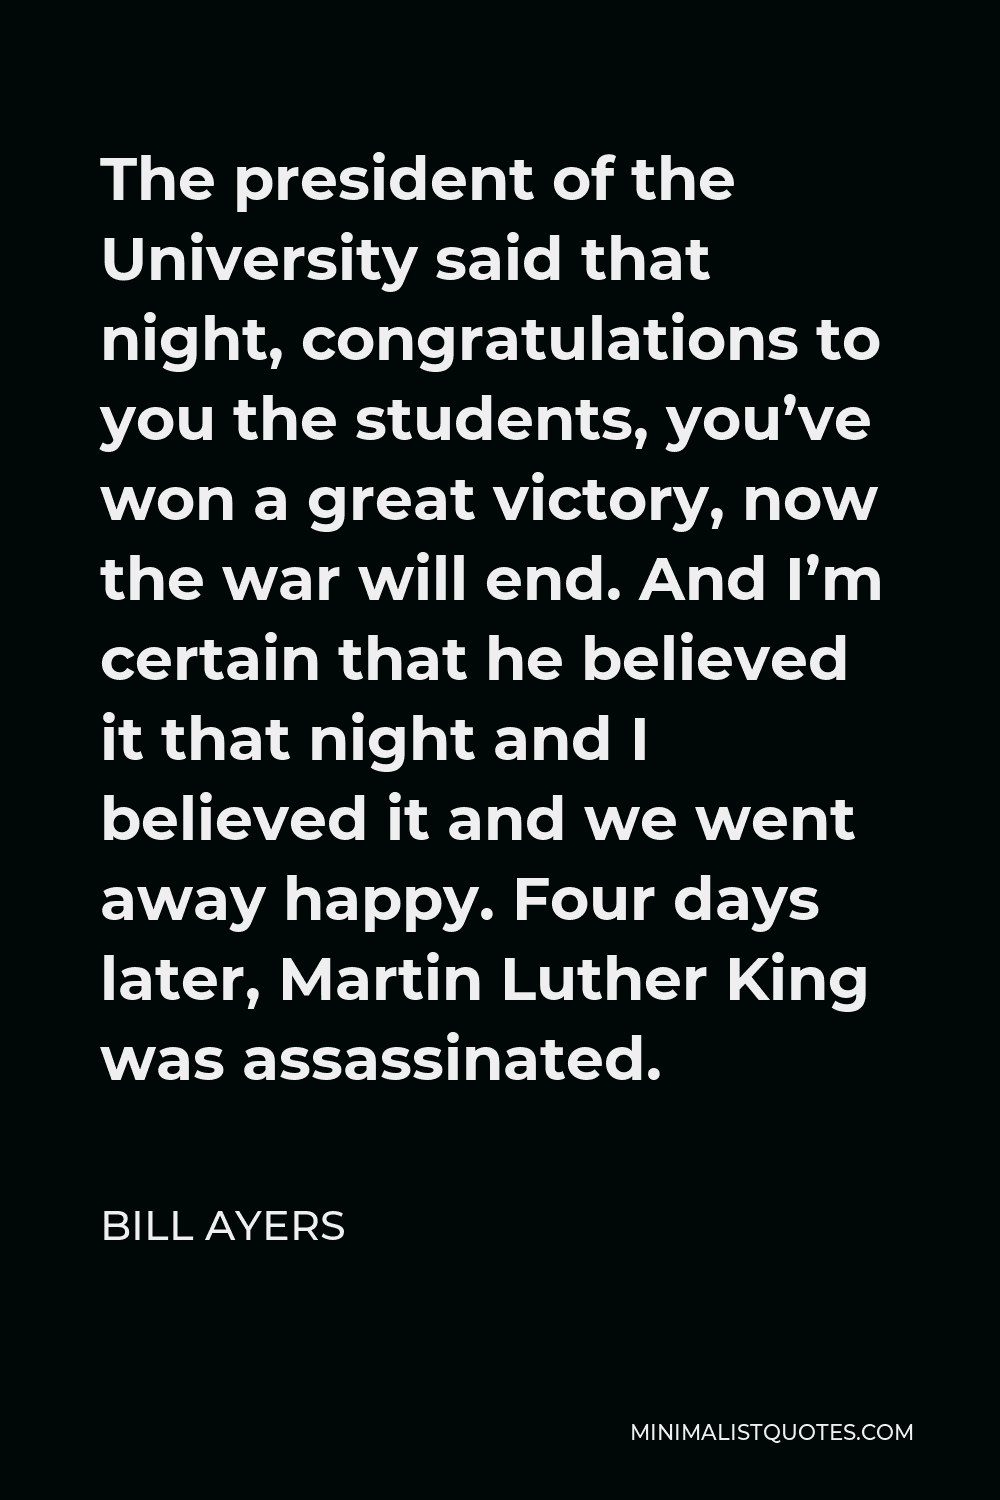 Bill Ayers Quote - The president of the University said that night, congratulations to you the students, you’ve won a great victory, now the war will end. And I’m certain that he believed it that night and I believed it and we went away happy. Four days later, Martin Luther King was assassinated.